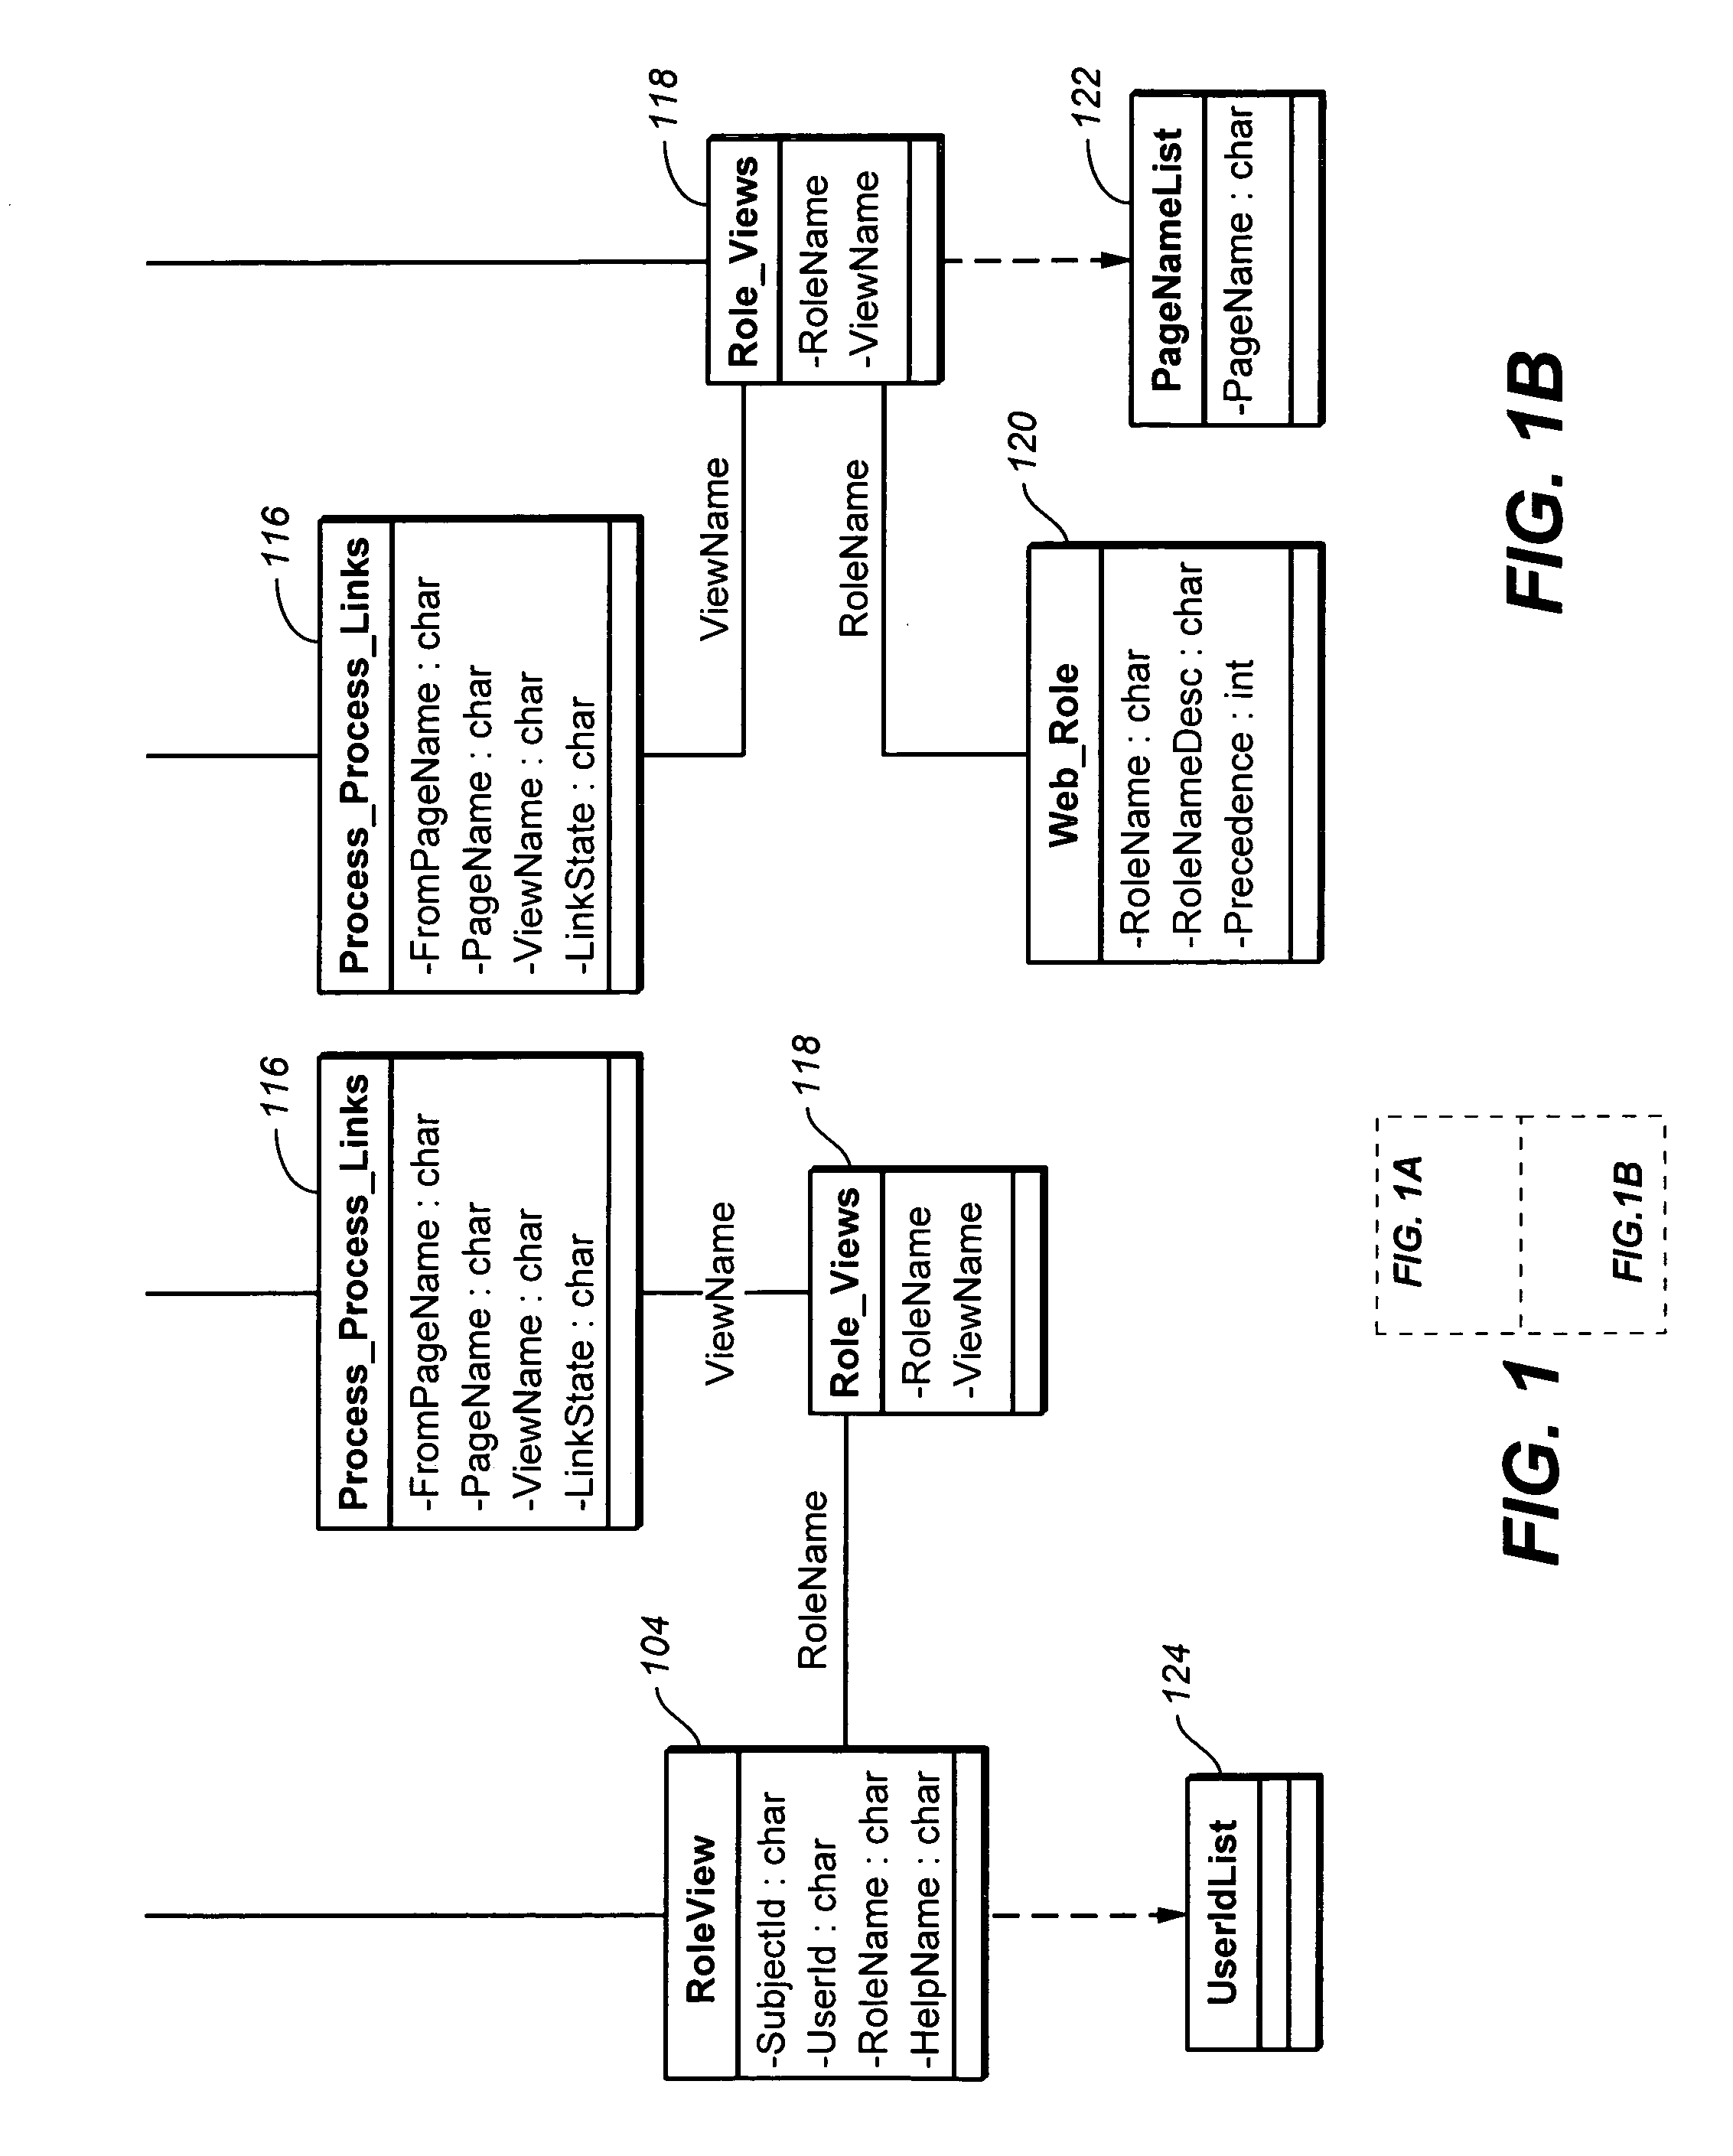 Database system and method for access control and workflow routing